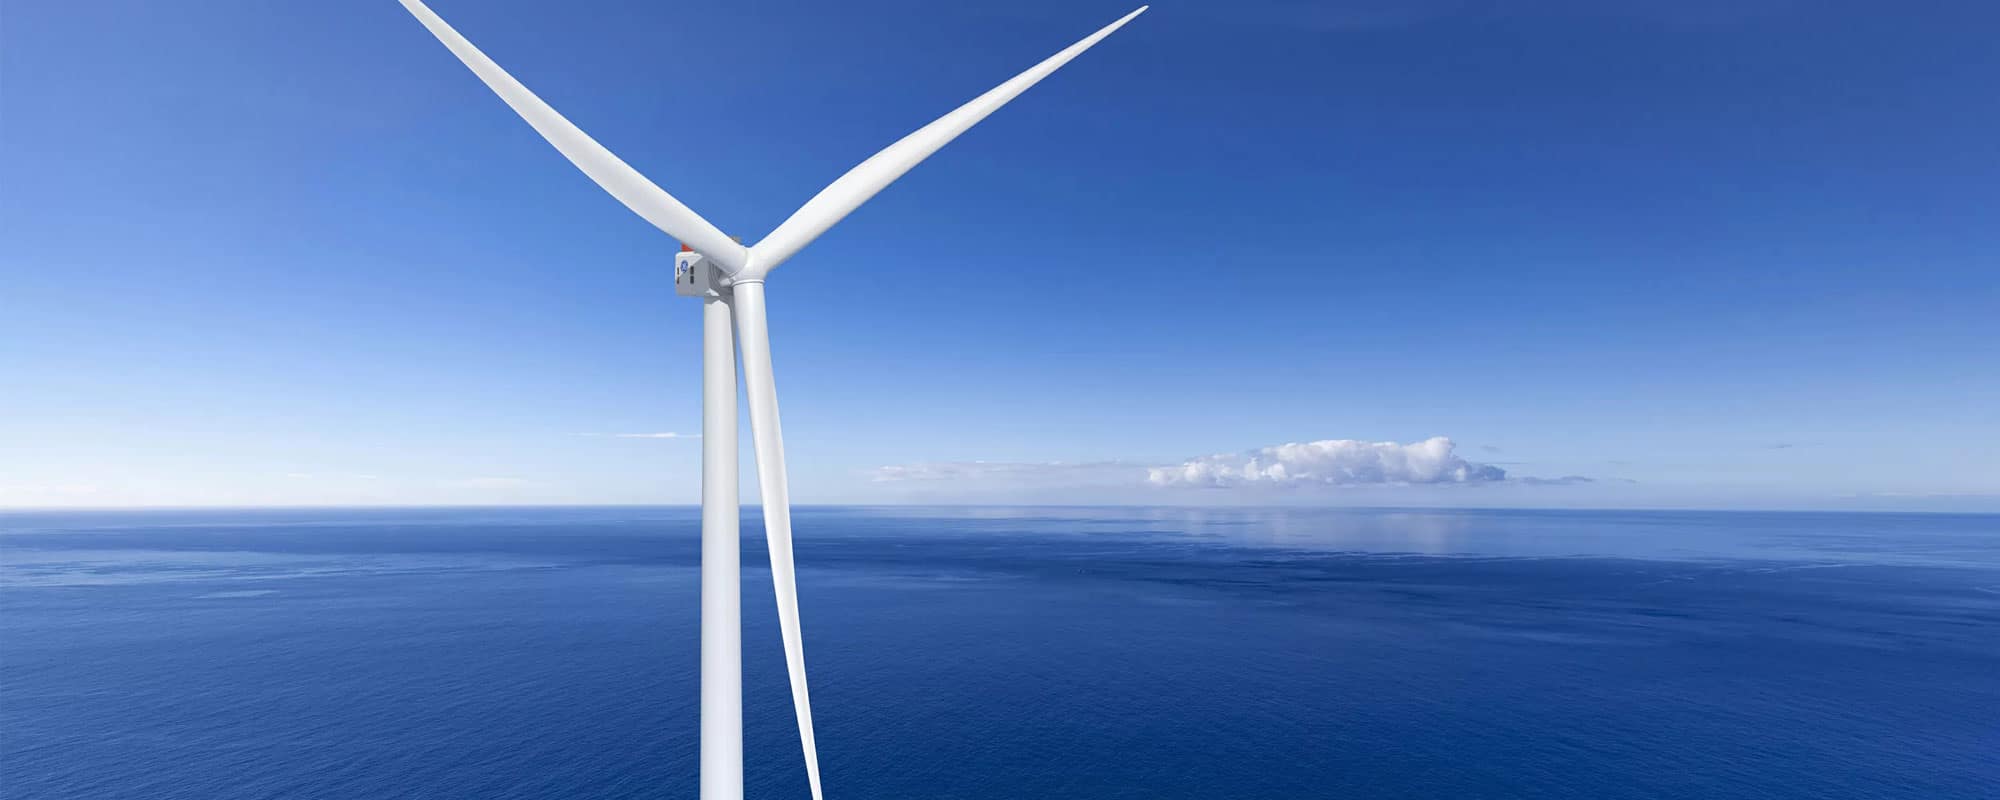 A Bearing Worthy of the World’s Most Powerful Wind Turbine